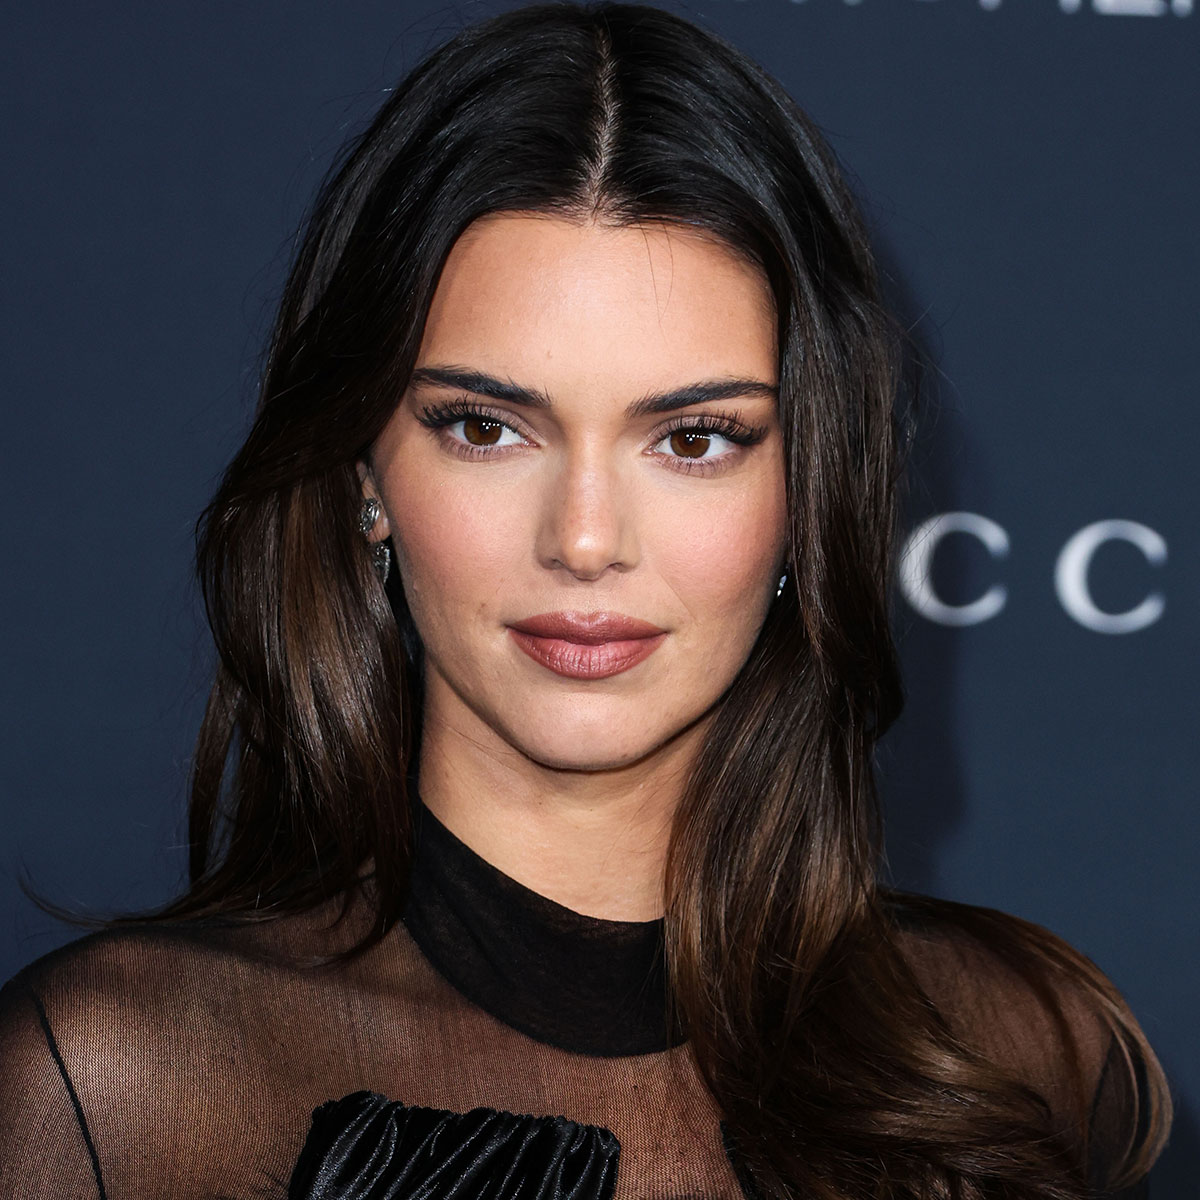 Kendall Jenner Breaks Instagram In A Strapless Leather Dress From Kylie  Jenner's New Clothing Line—So Stunning! - SHEfinds